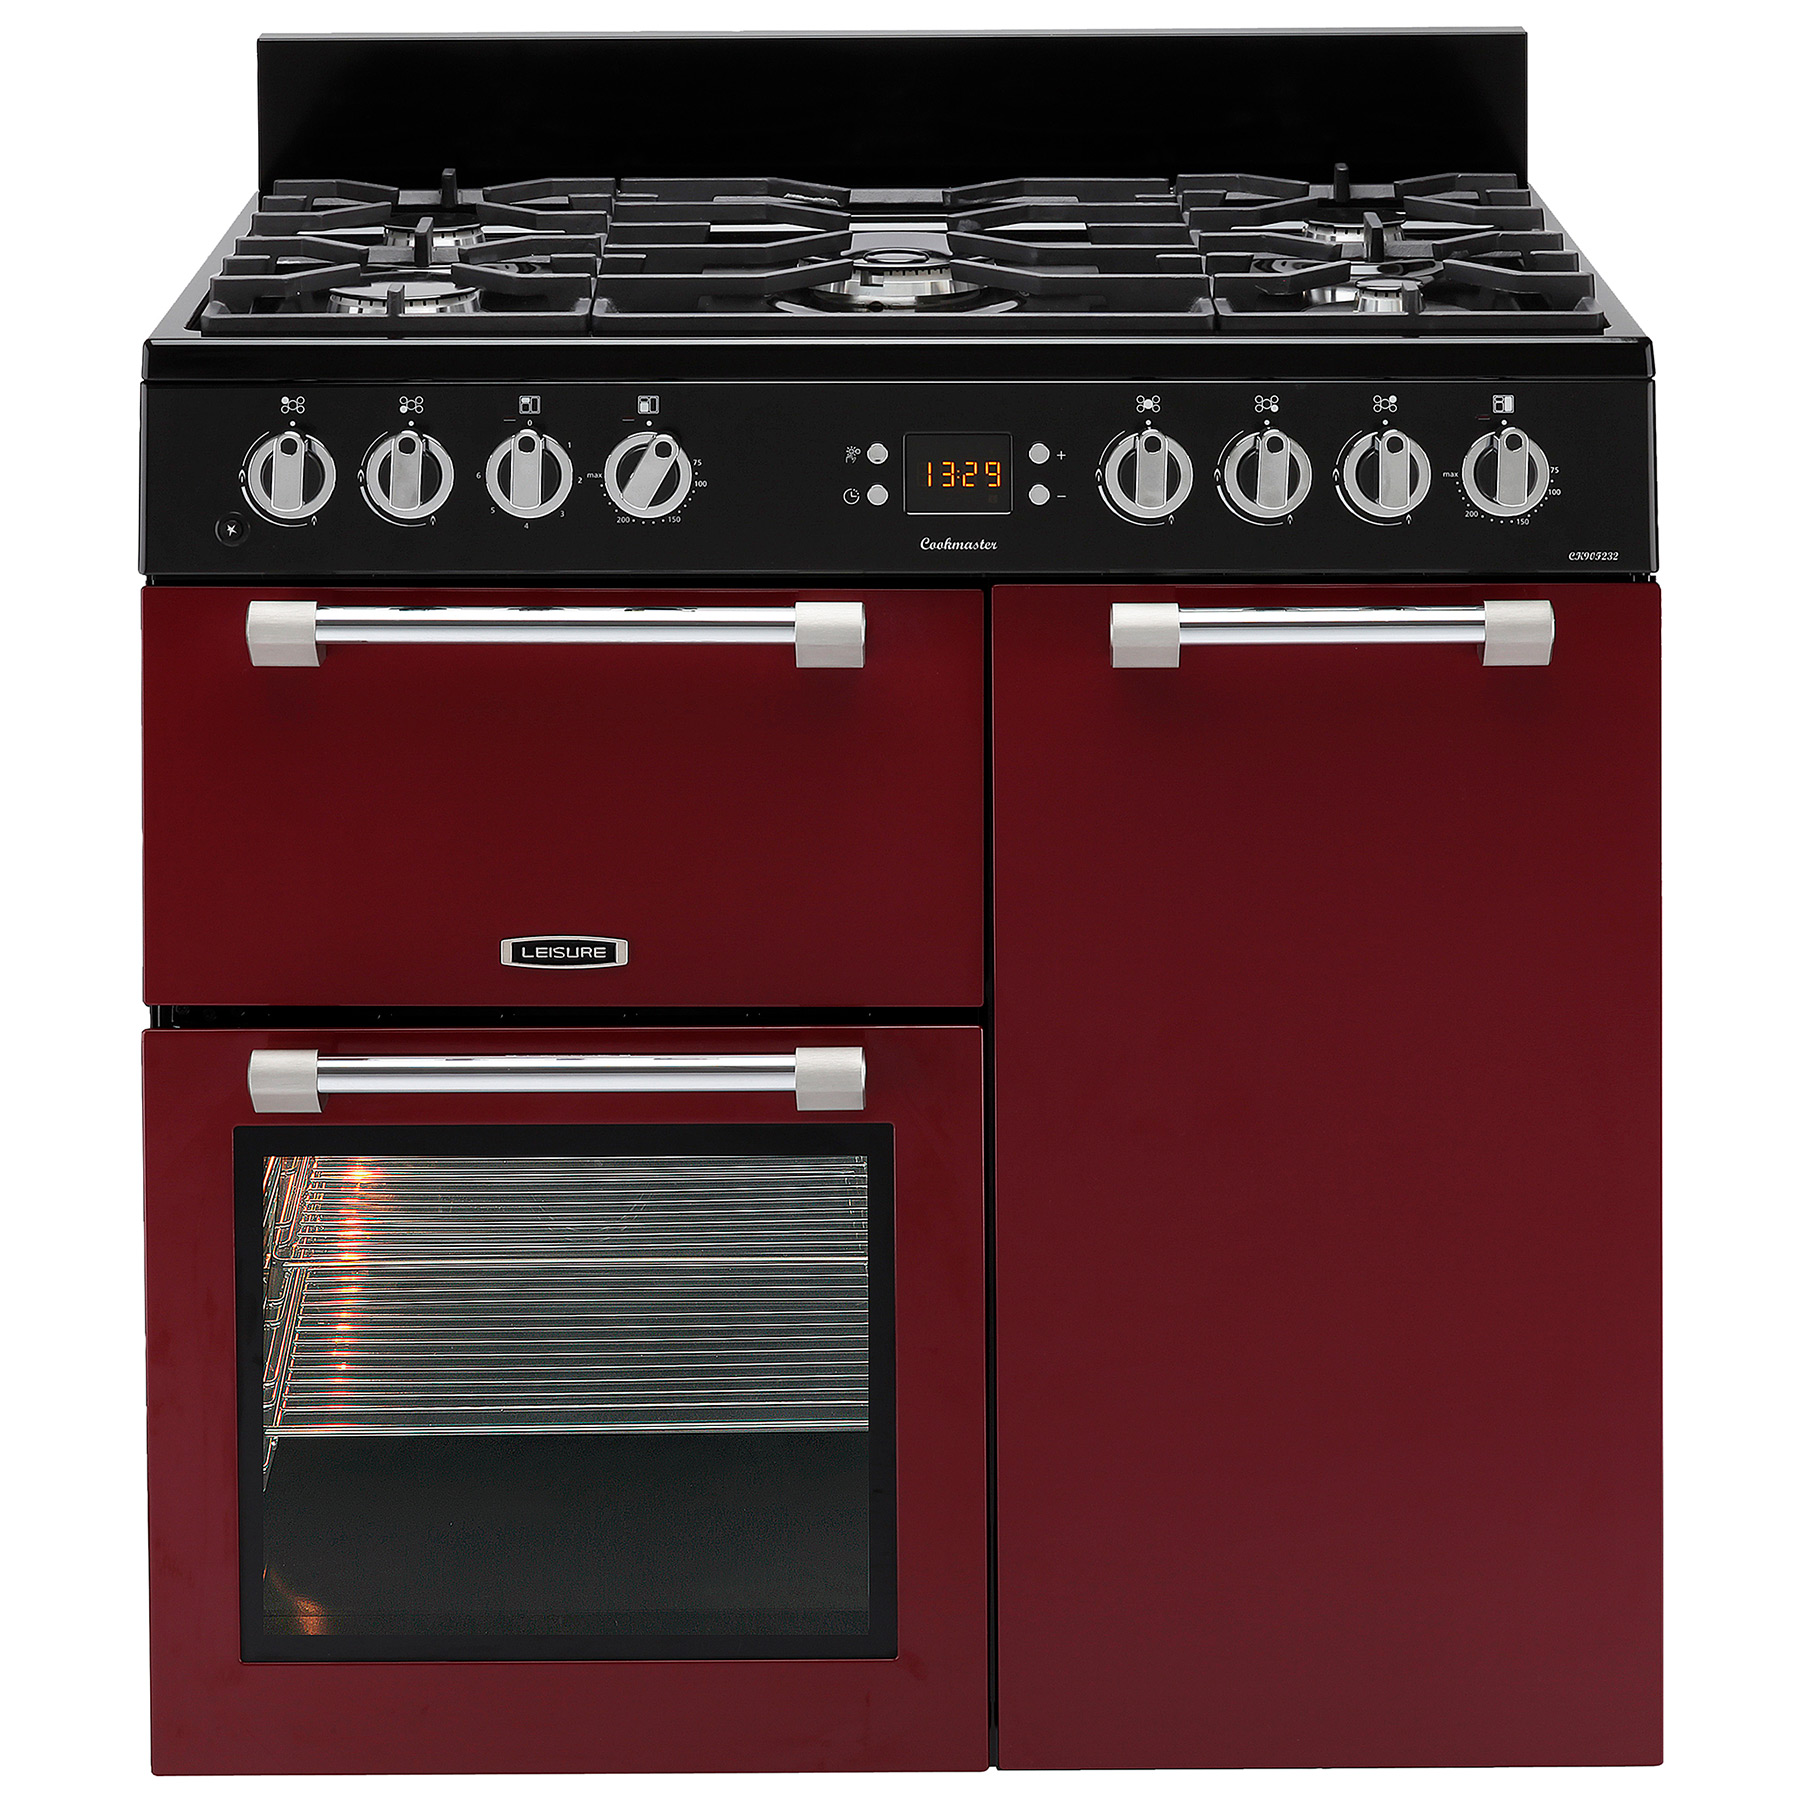 Image of Leisure CK90F232R 90cm Cookmaster Dual Fuel Range Cooker in Red